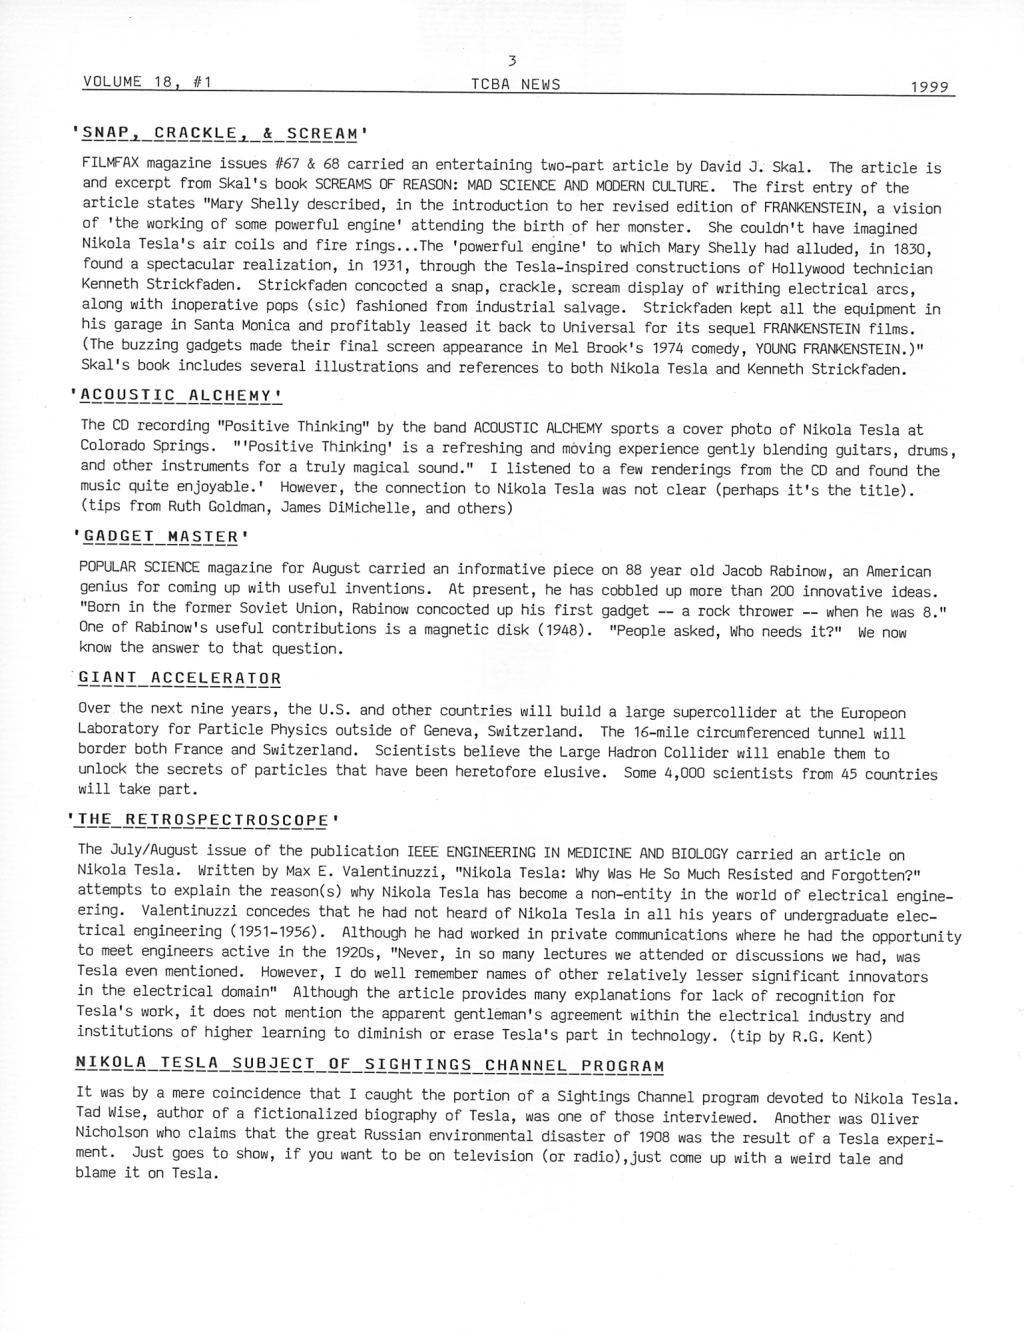 TCBA Volume 18 - Issue 1 - Page 3 of 18